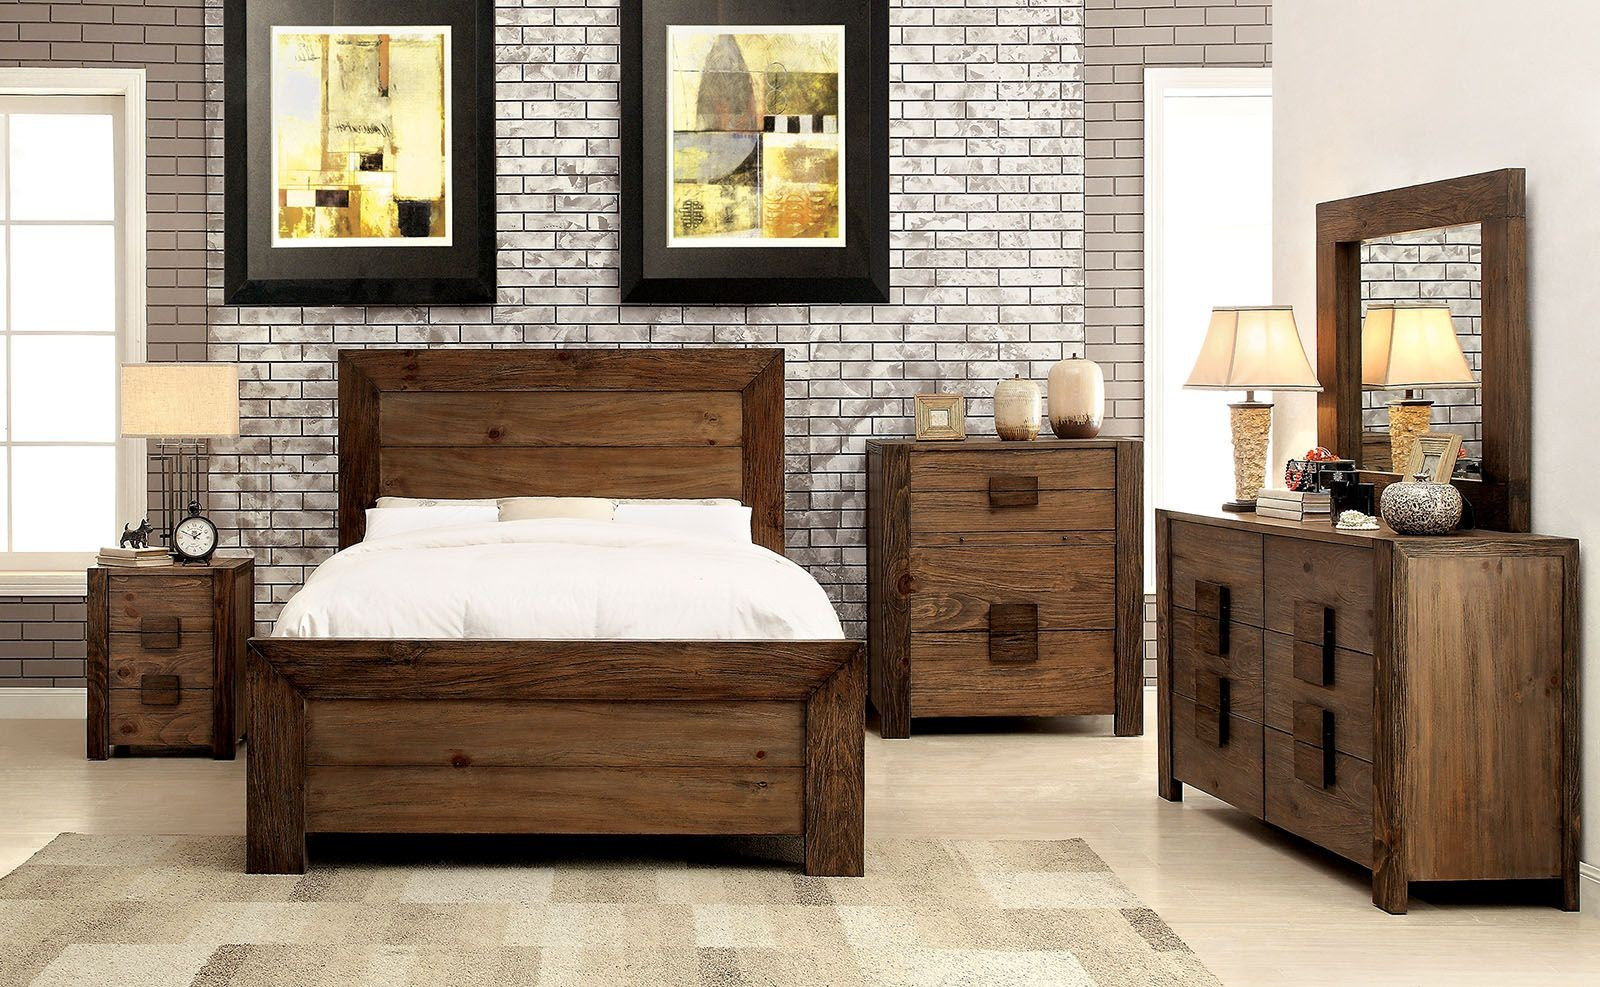 Rustic Bedroom Sets
 Aveiro Rustic Natural Panel Bedroom Set from Furniture of